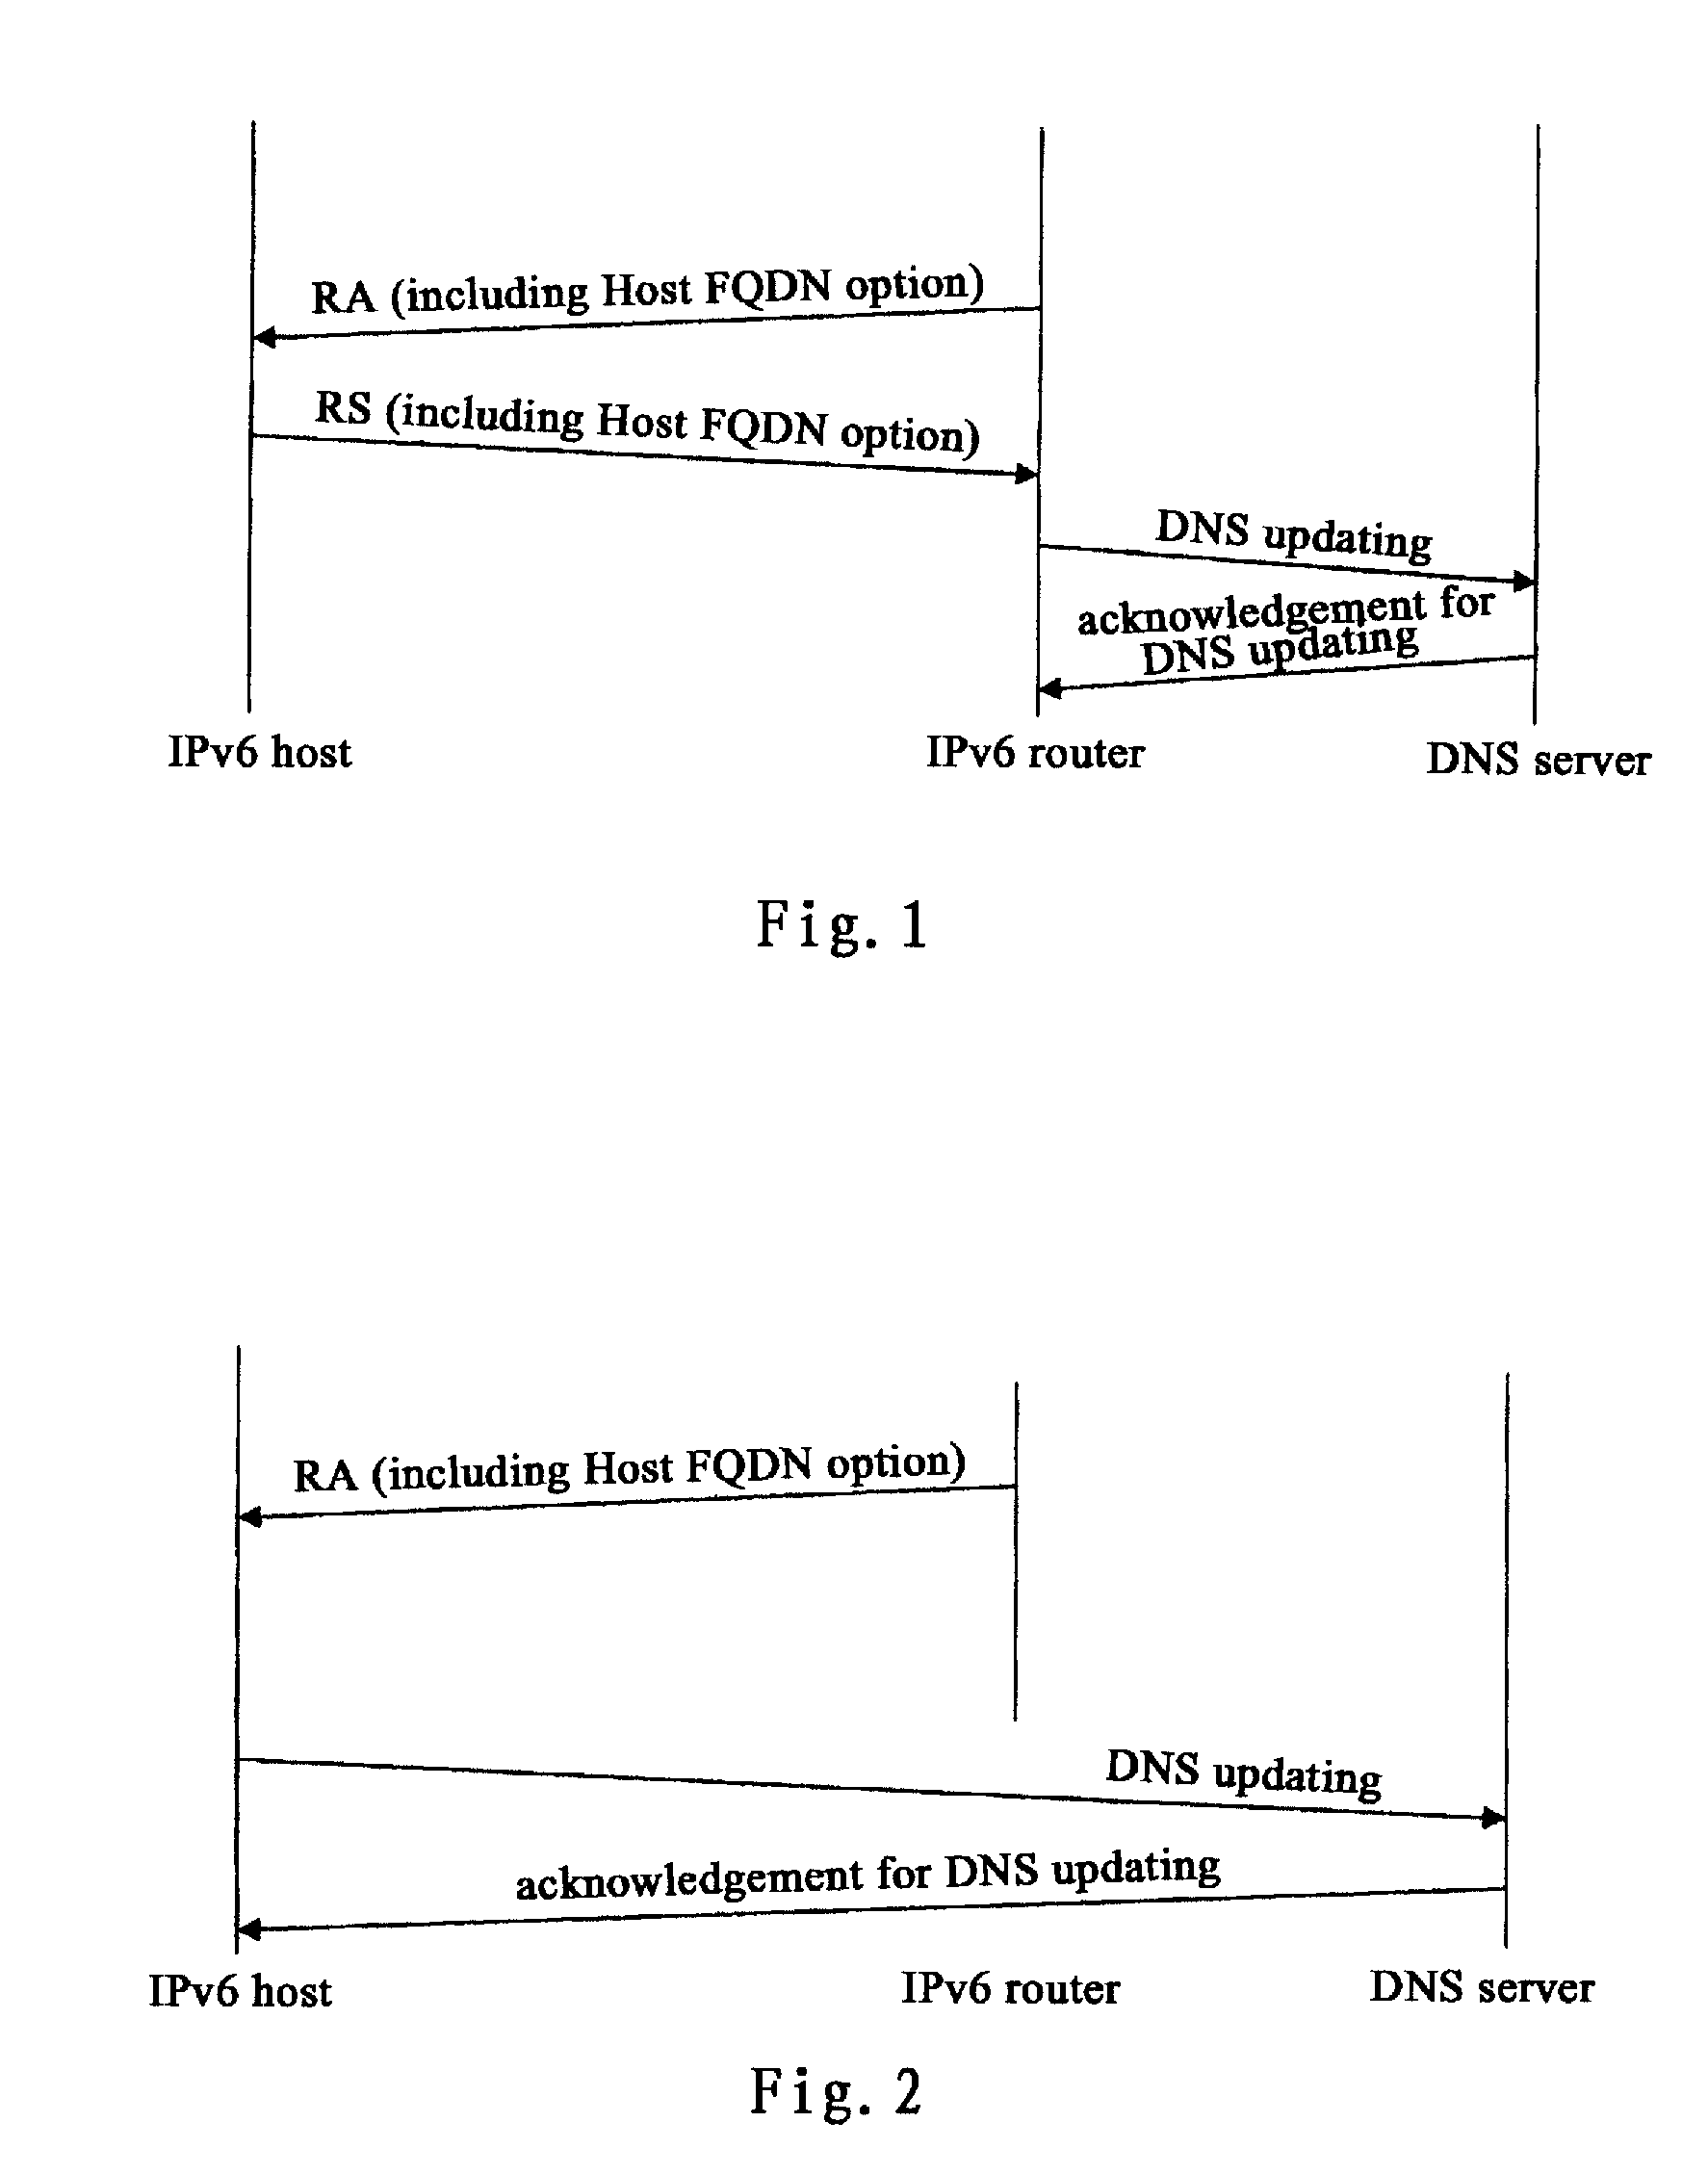 Method and apparatus for updating DNS of host in ipv6 stateless address configuration